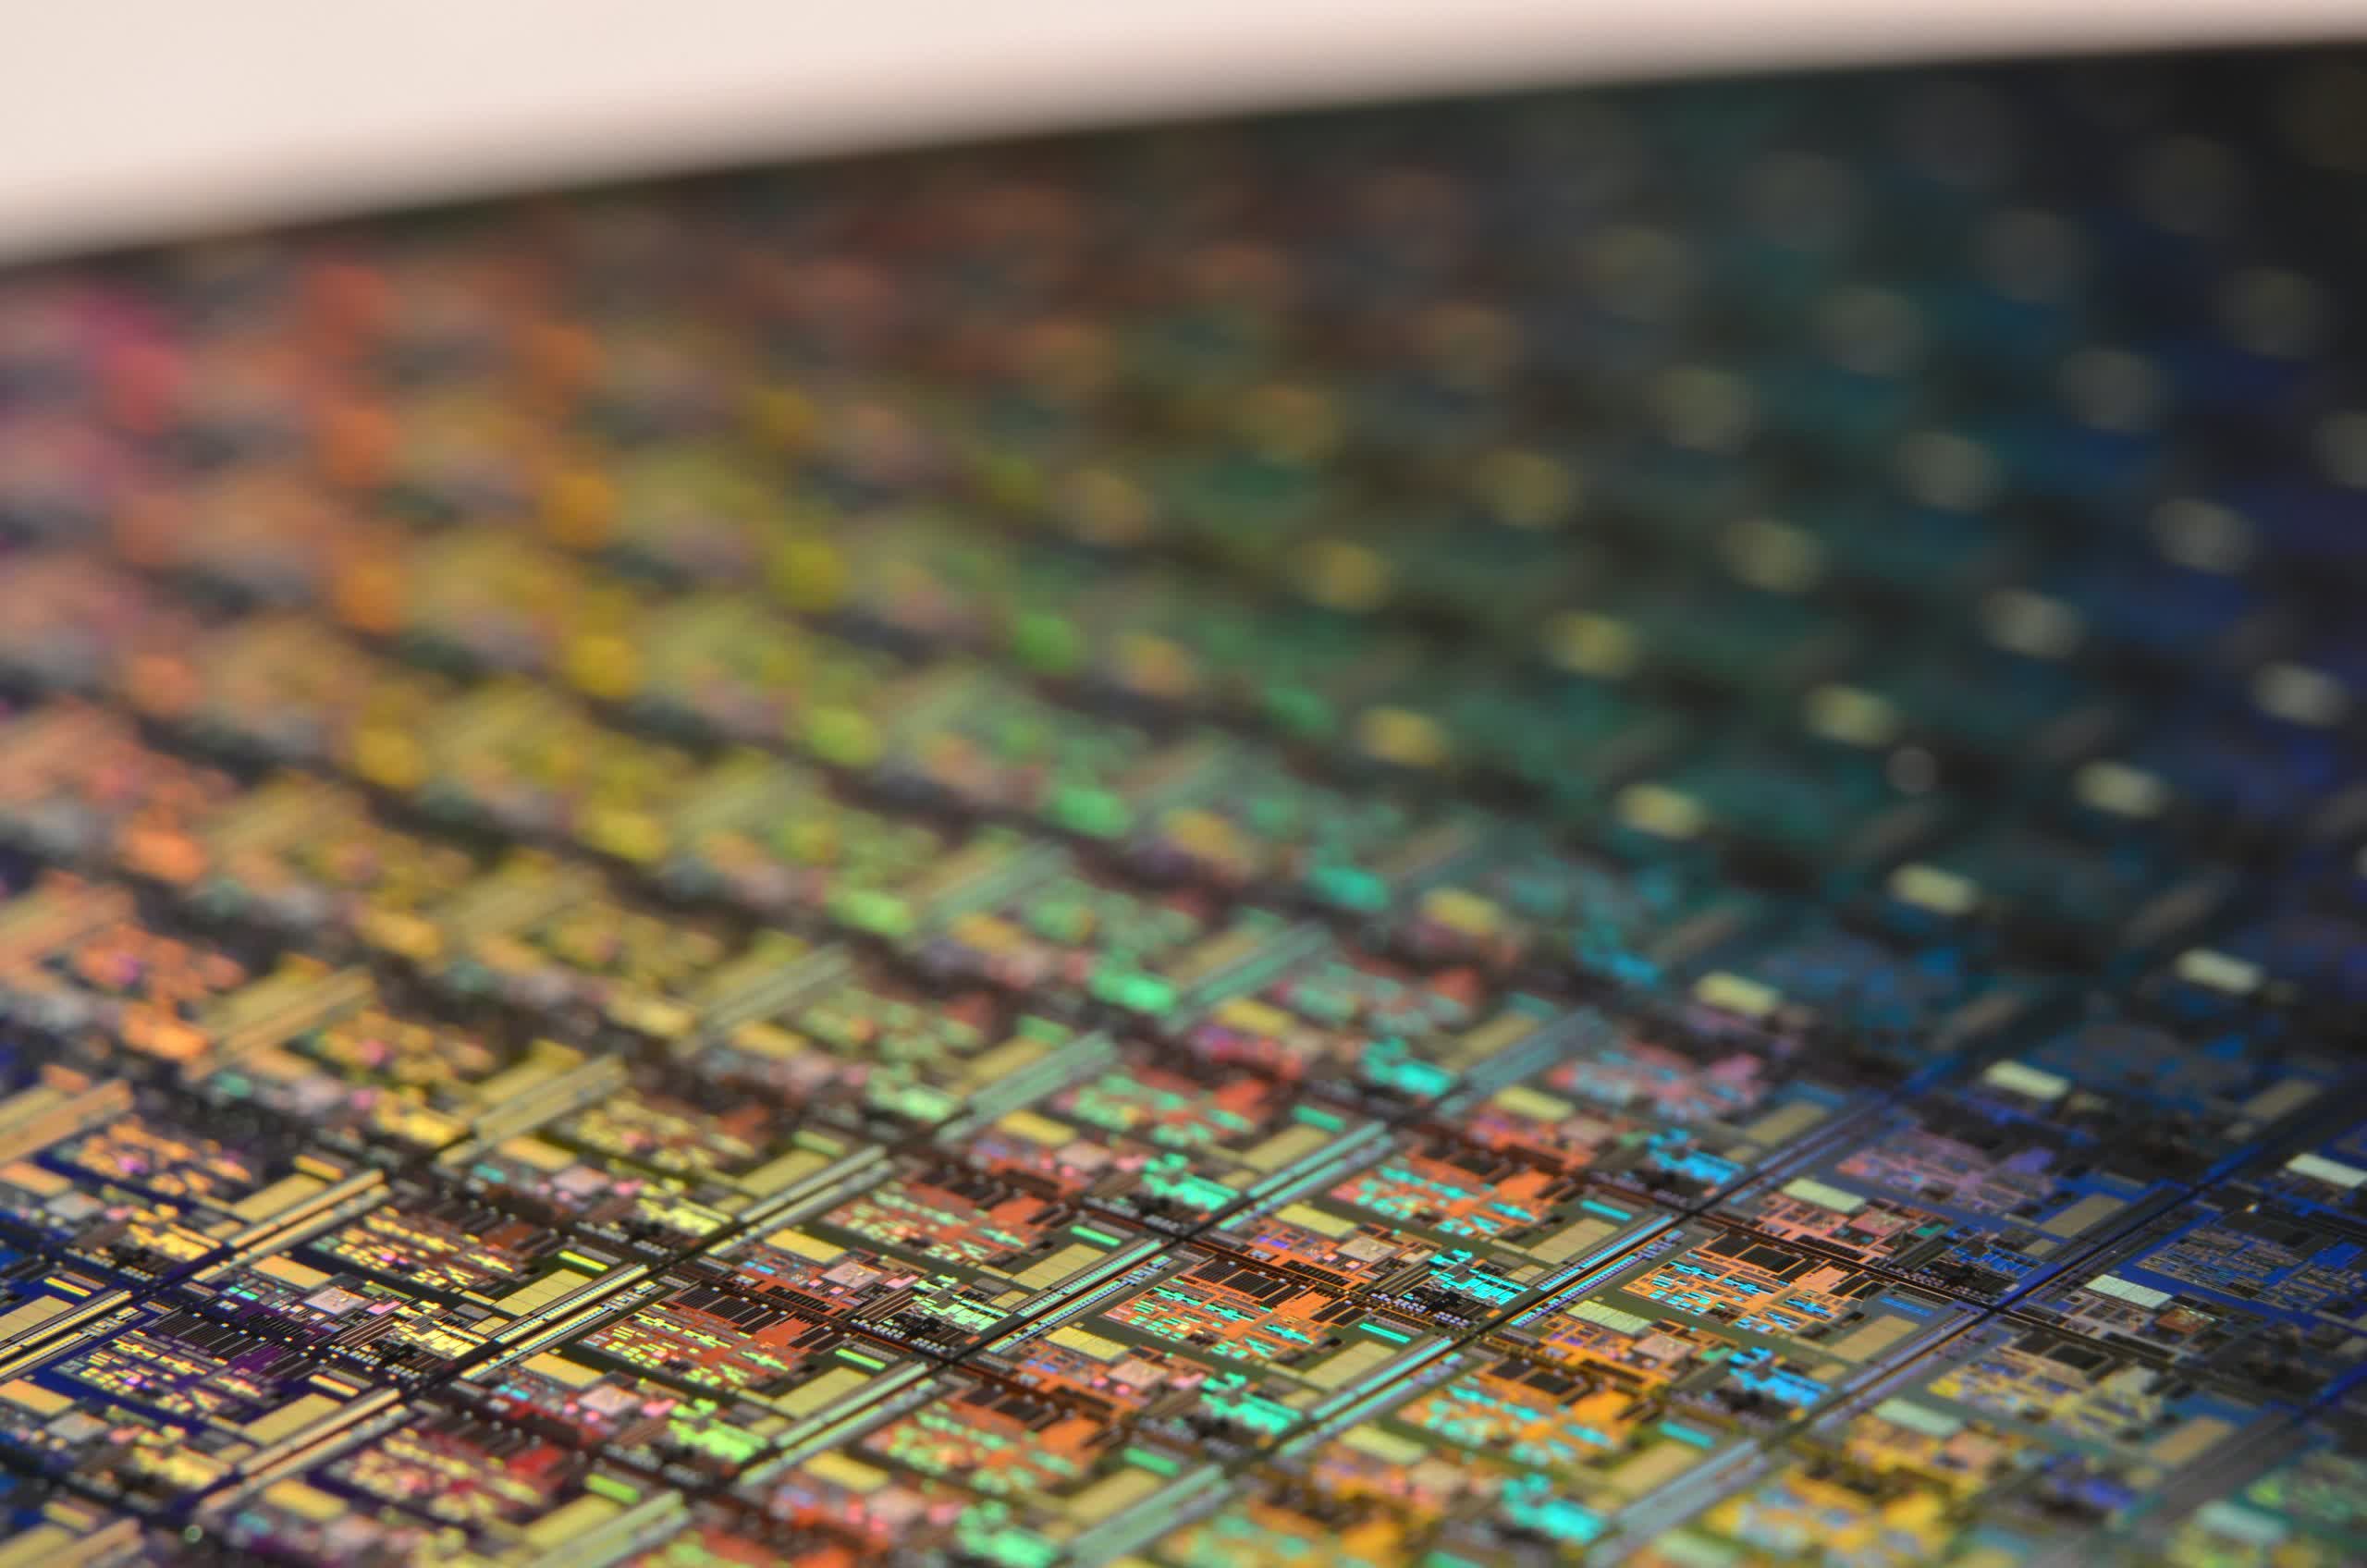 Intel's $5.4 billion acquisition of Tower Semiconductor has been called off